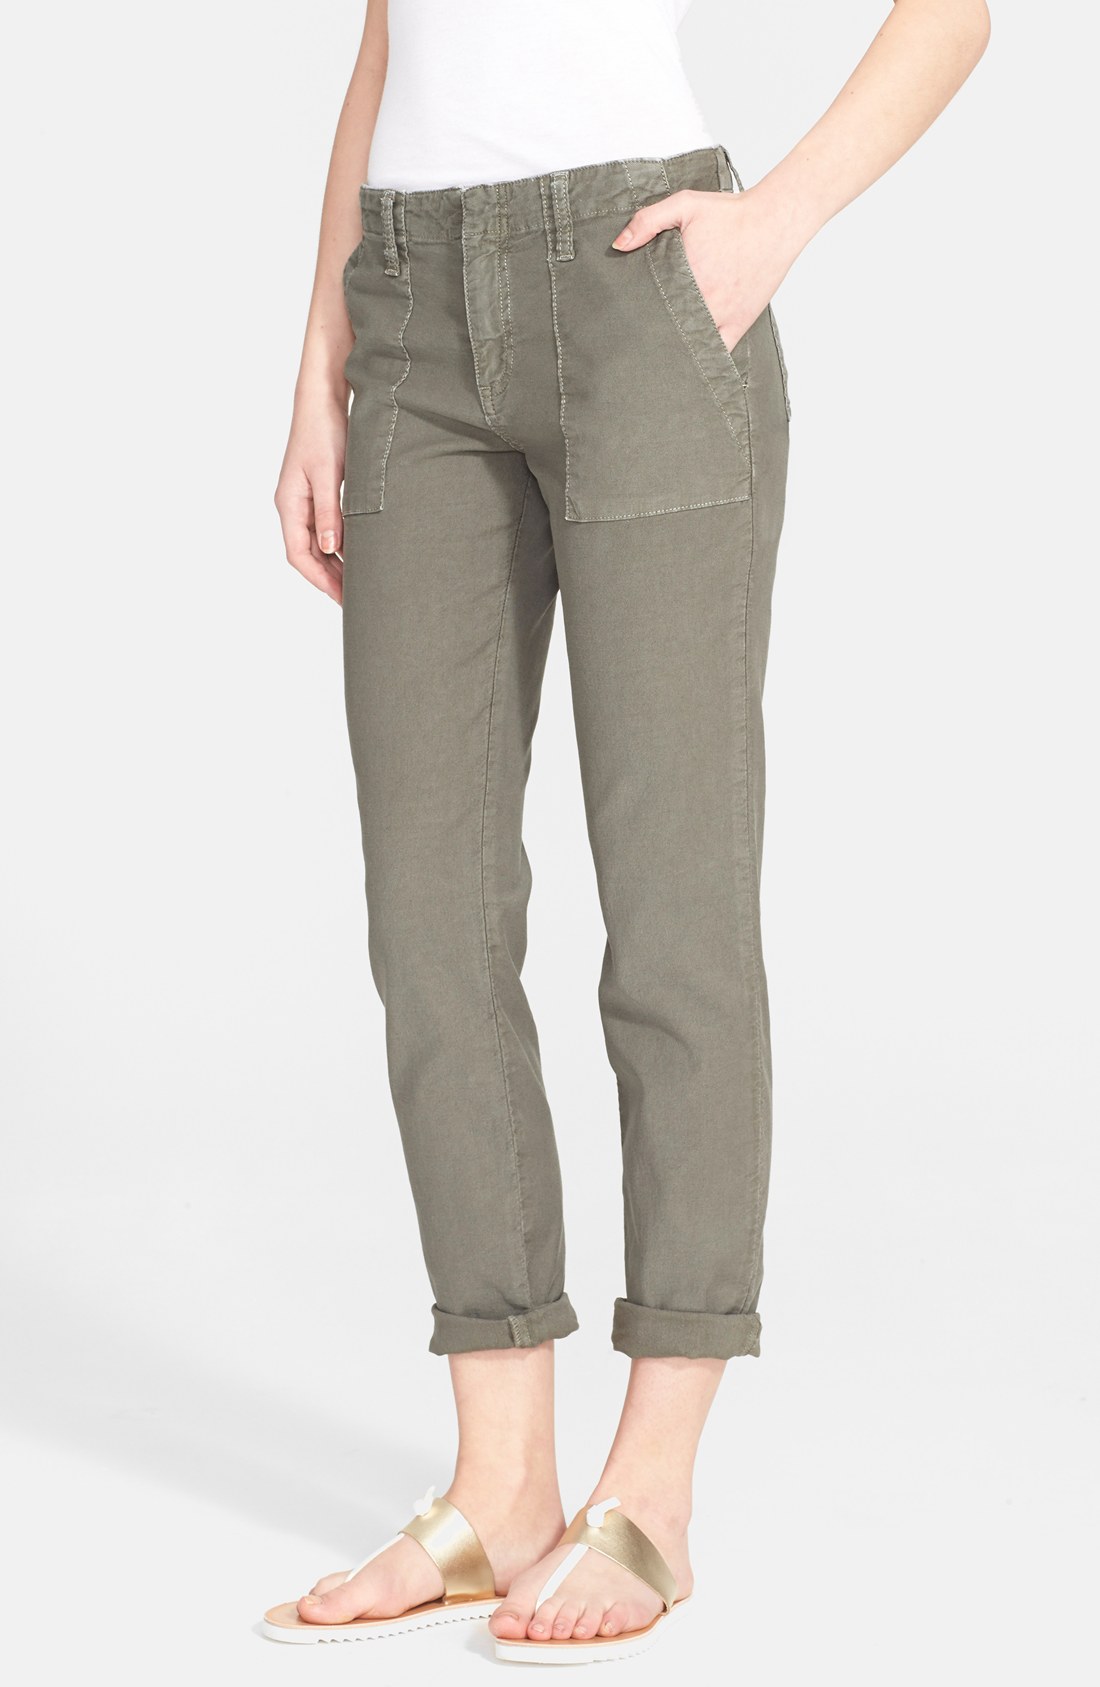 Linen Pants for Women: The Best Outfits – careyfashion.com